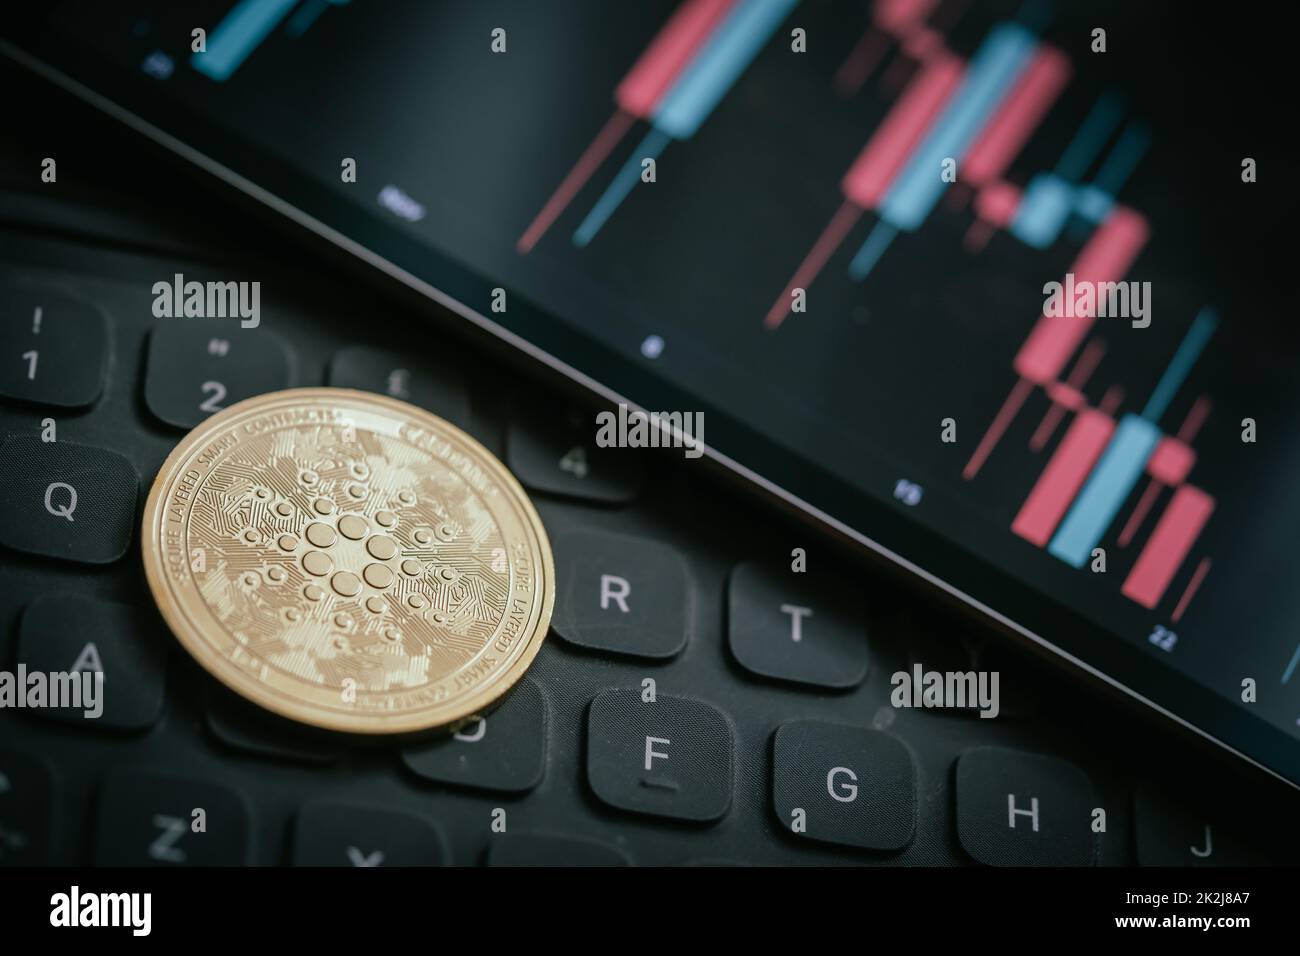 Golden Cardano (ADA) cryptocurrency coin with candle stick graph chart, laptop keyboard, and digital background. Stock Photo